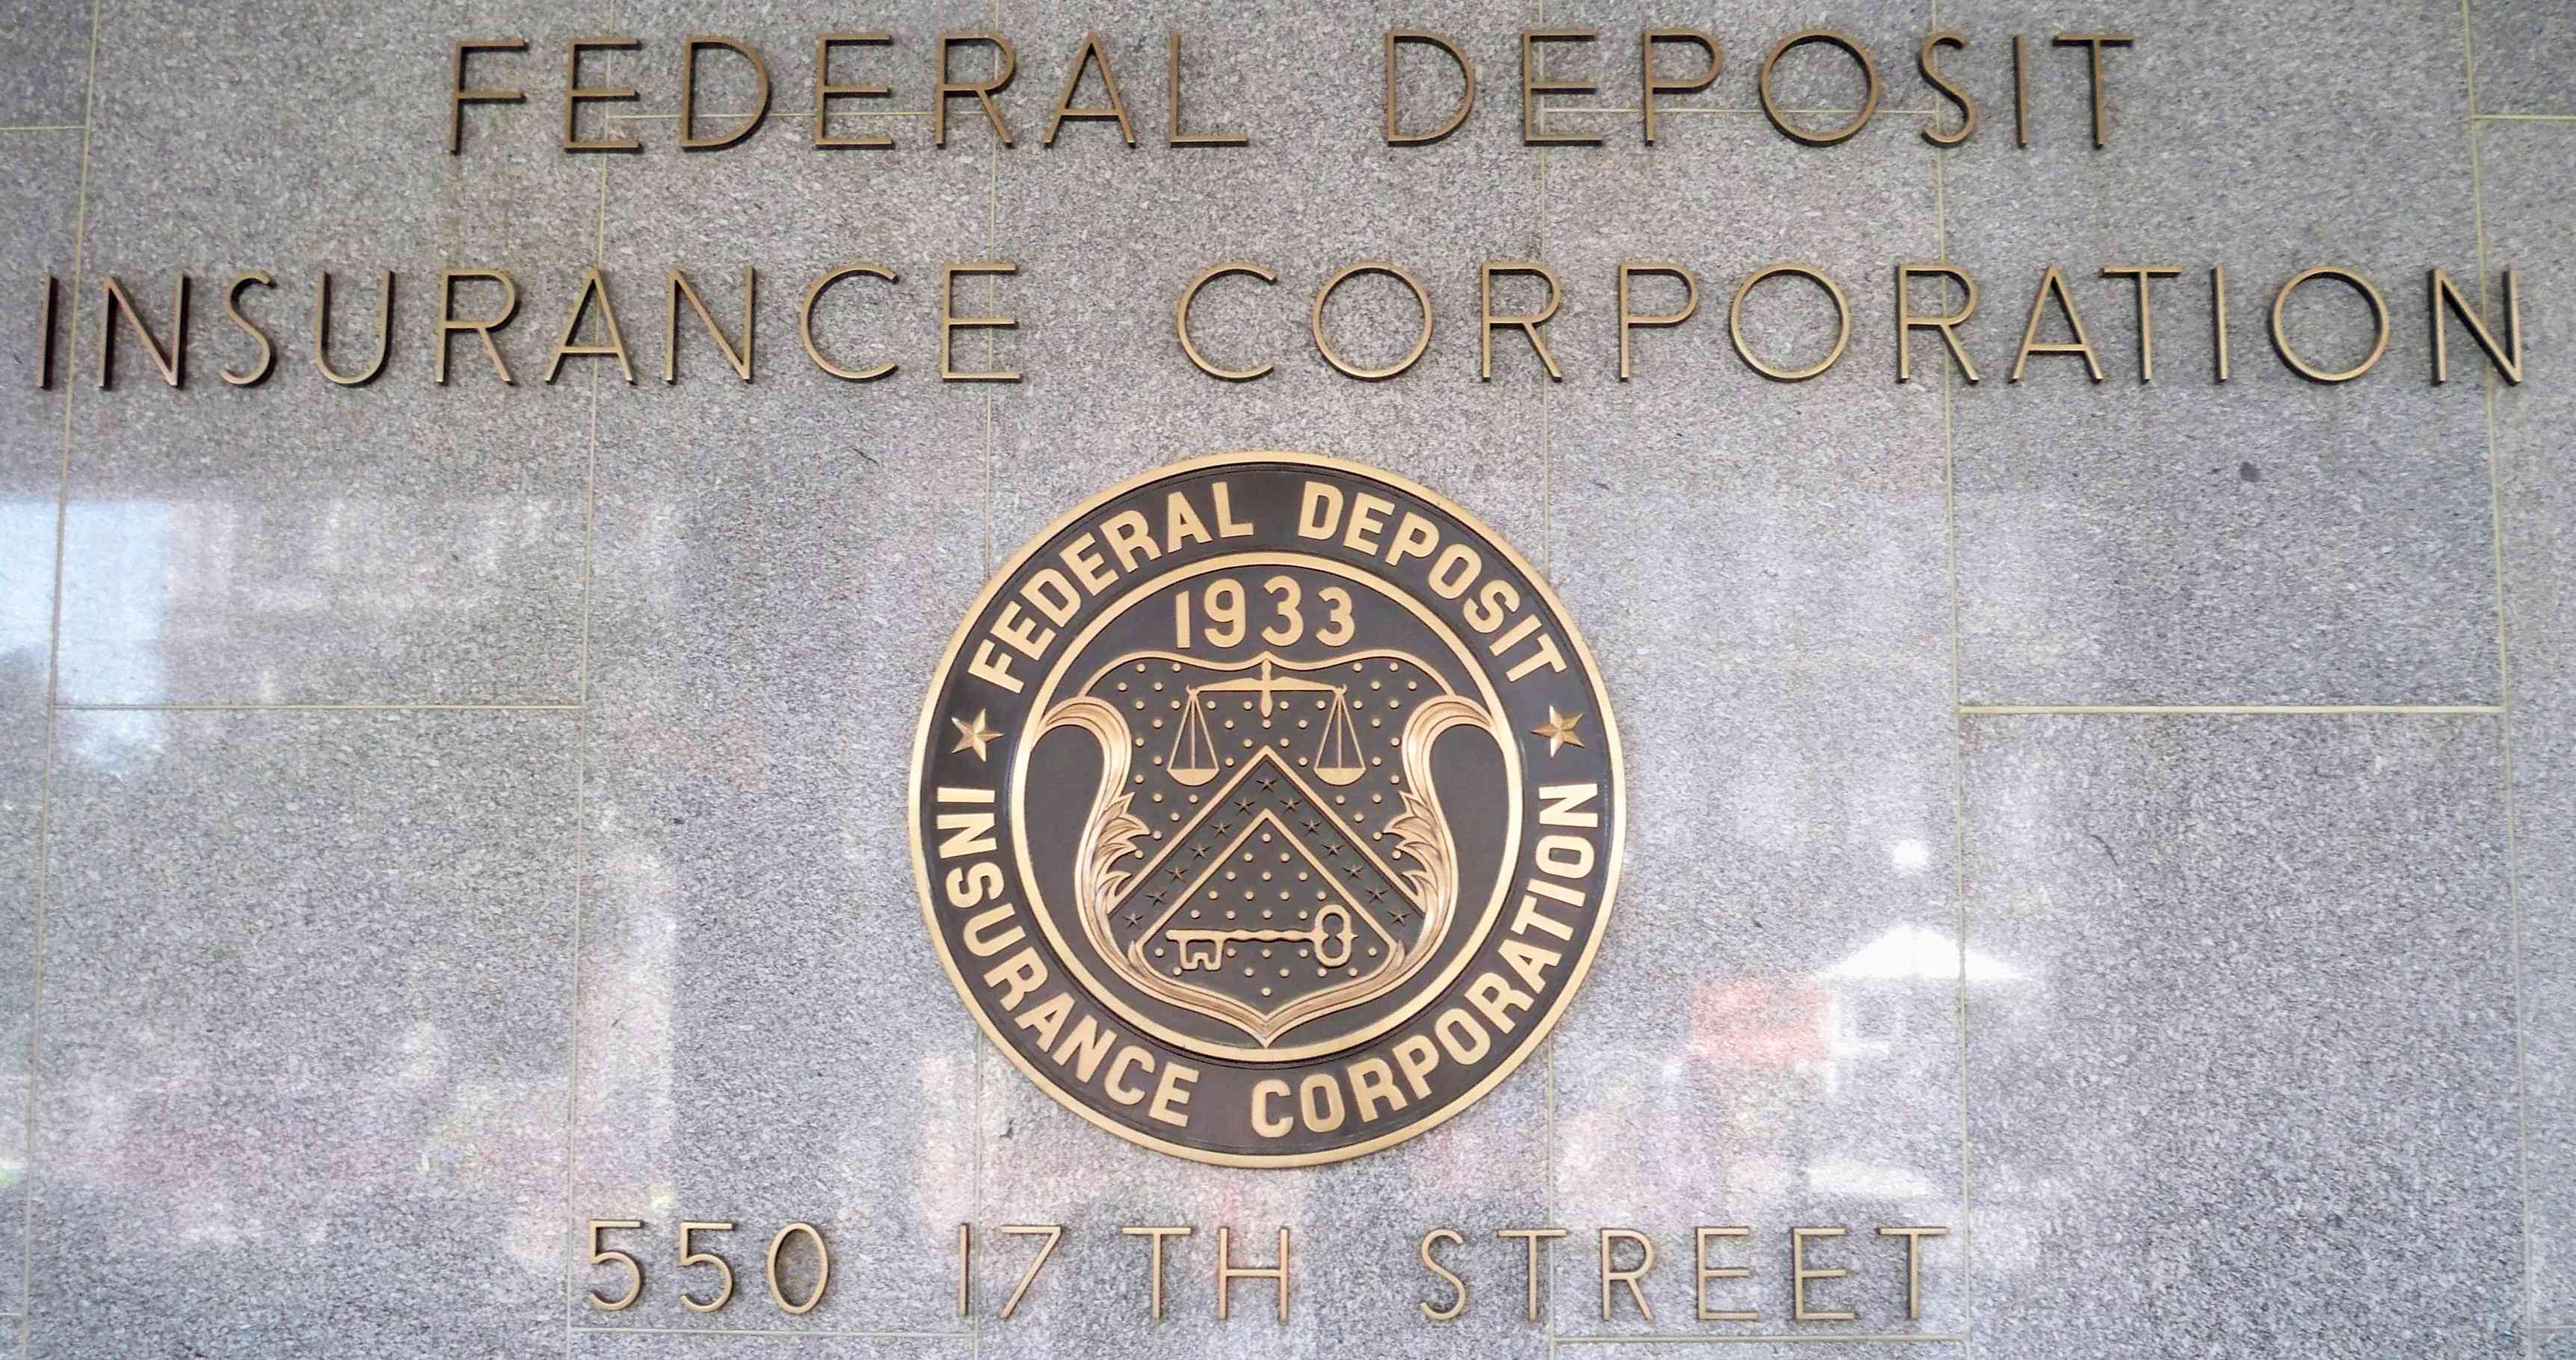 Seal of the FDIC, the government agency responsible for insuring bank deposits.